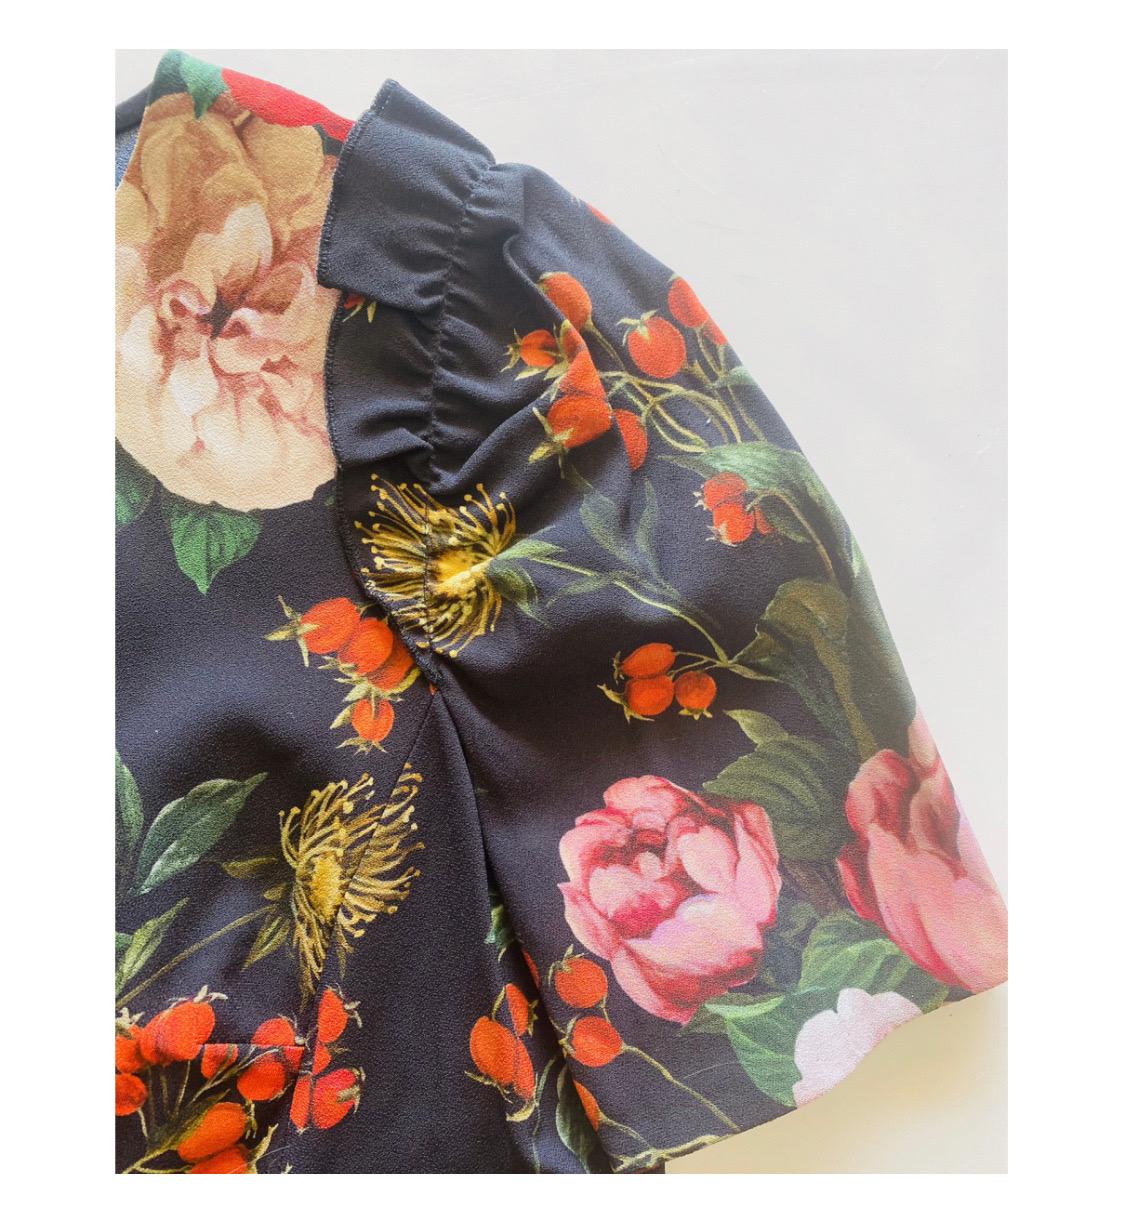 Dolce & Gabbana Floral printed top
blouse

Size 44IT, UK12, L


Viscose / Elasthan

Brand new with tags!

Please check my other DG clothing &

accessories!
